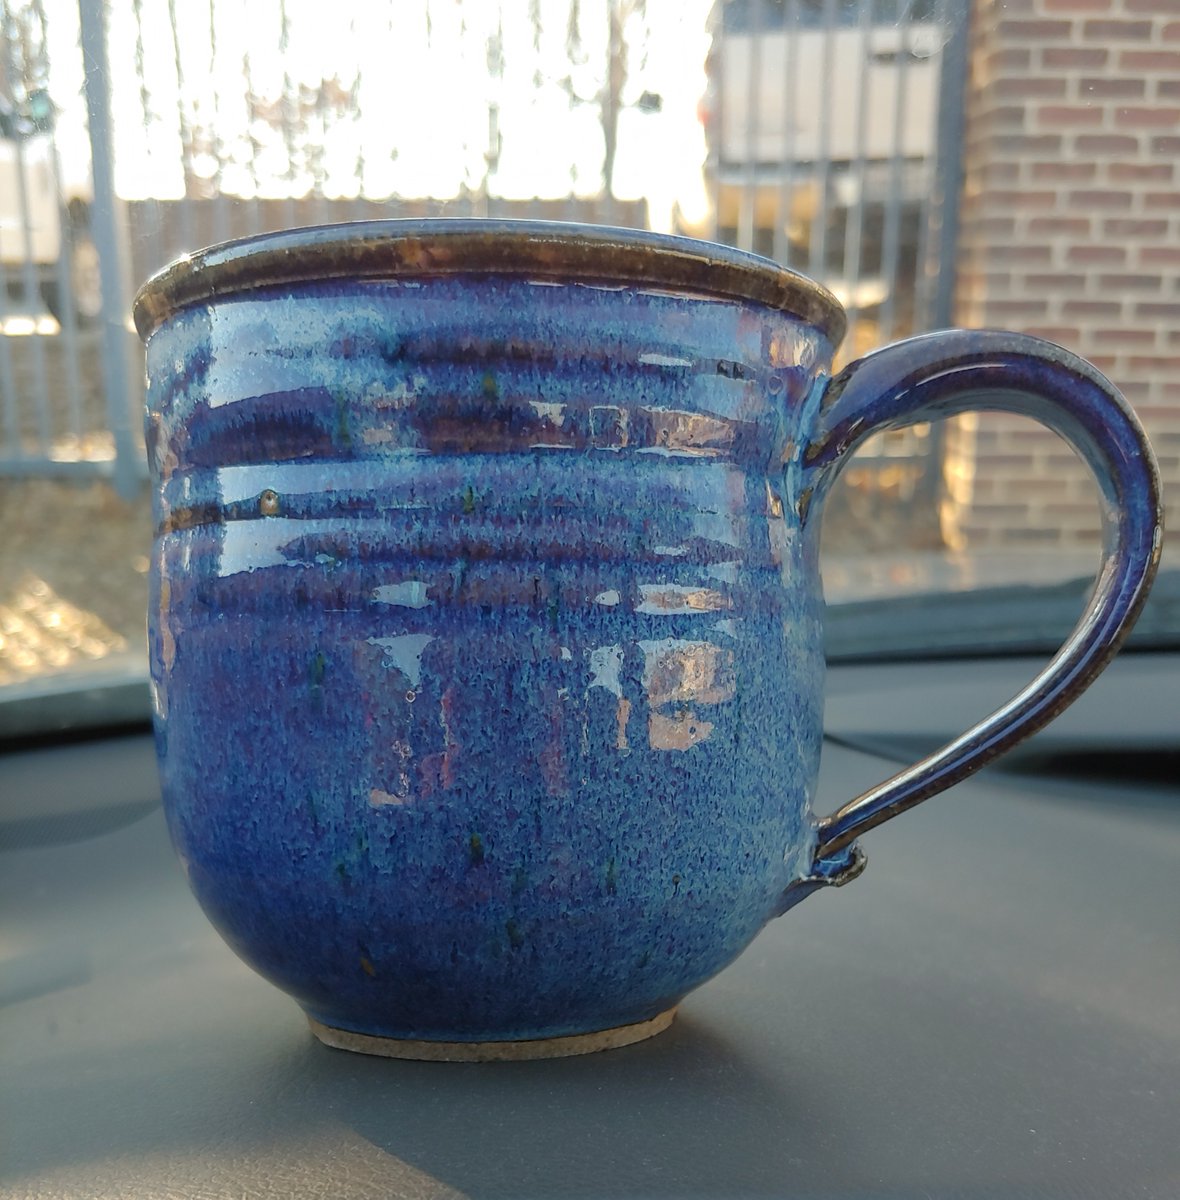 I also made a mental note to remember the effectiveness of that sentence, because boy howdy.

And here is a picture of my new handthrown mug, which is a nice 14-16 ouncer. 😍